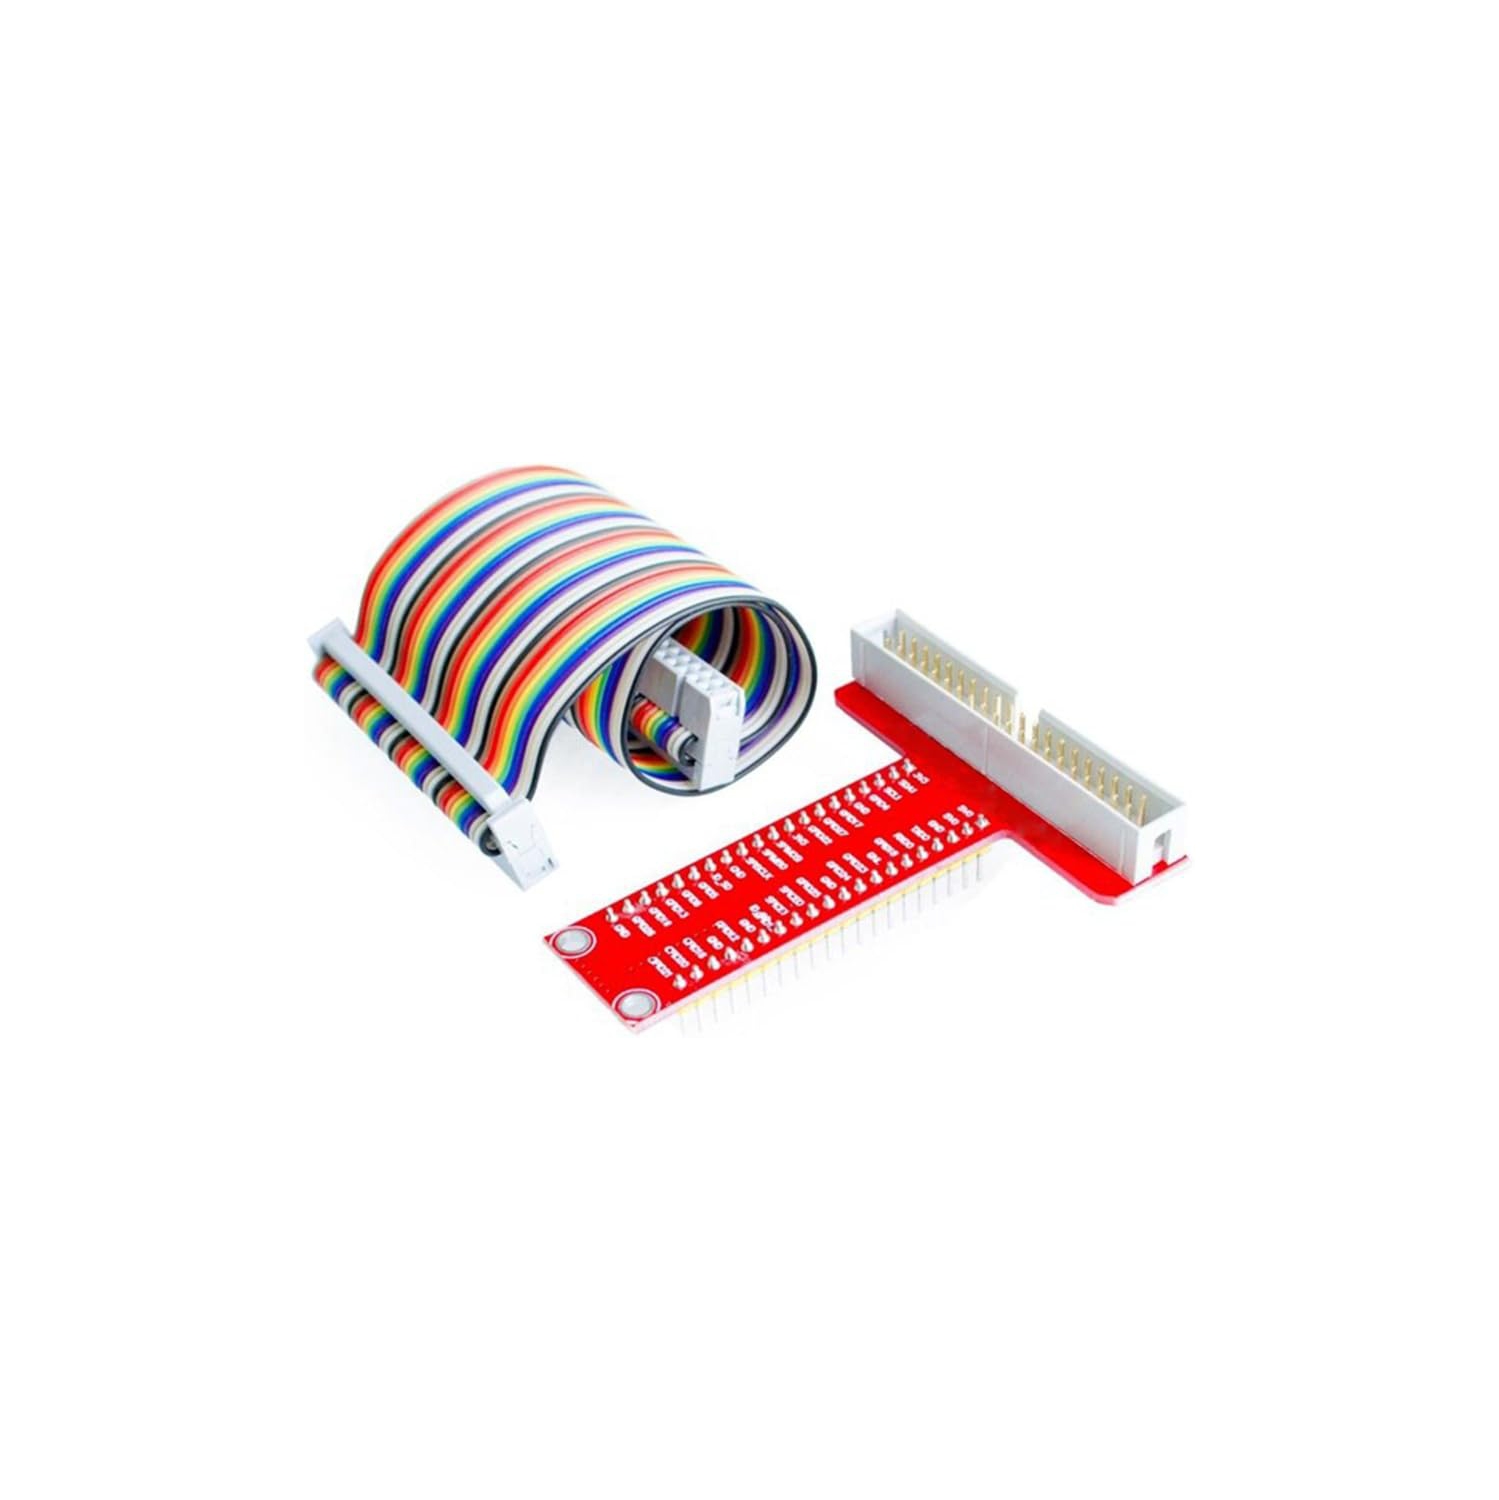 T Type RPi GPIO Breakout Expansion Board + Assembled T Type GPIO Adapter + 20cm FC40 40pin Flat Ribbon Cable